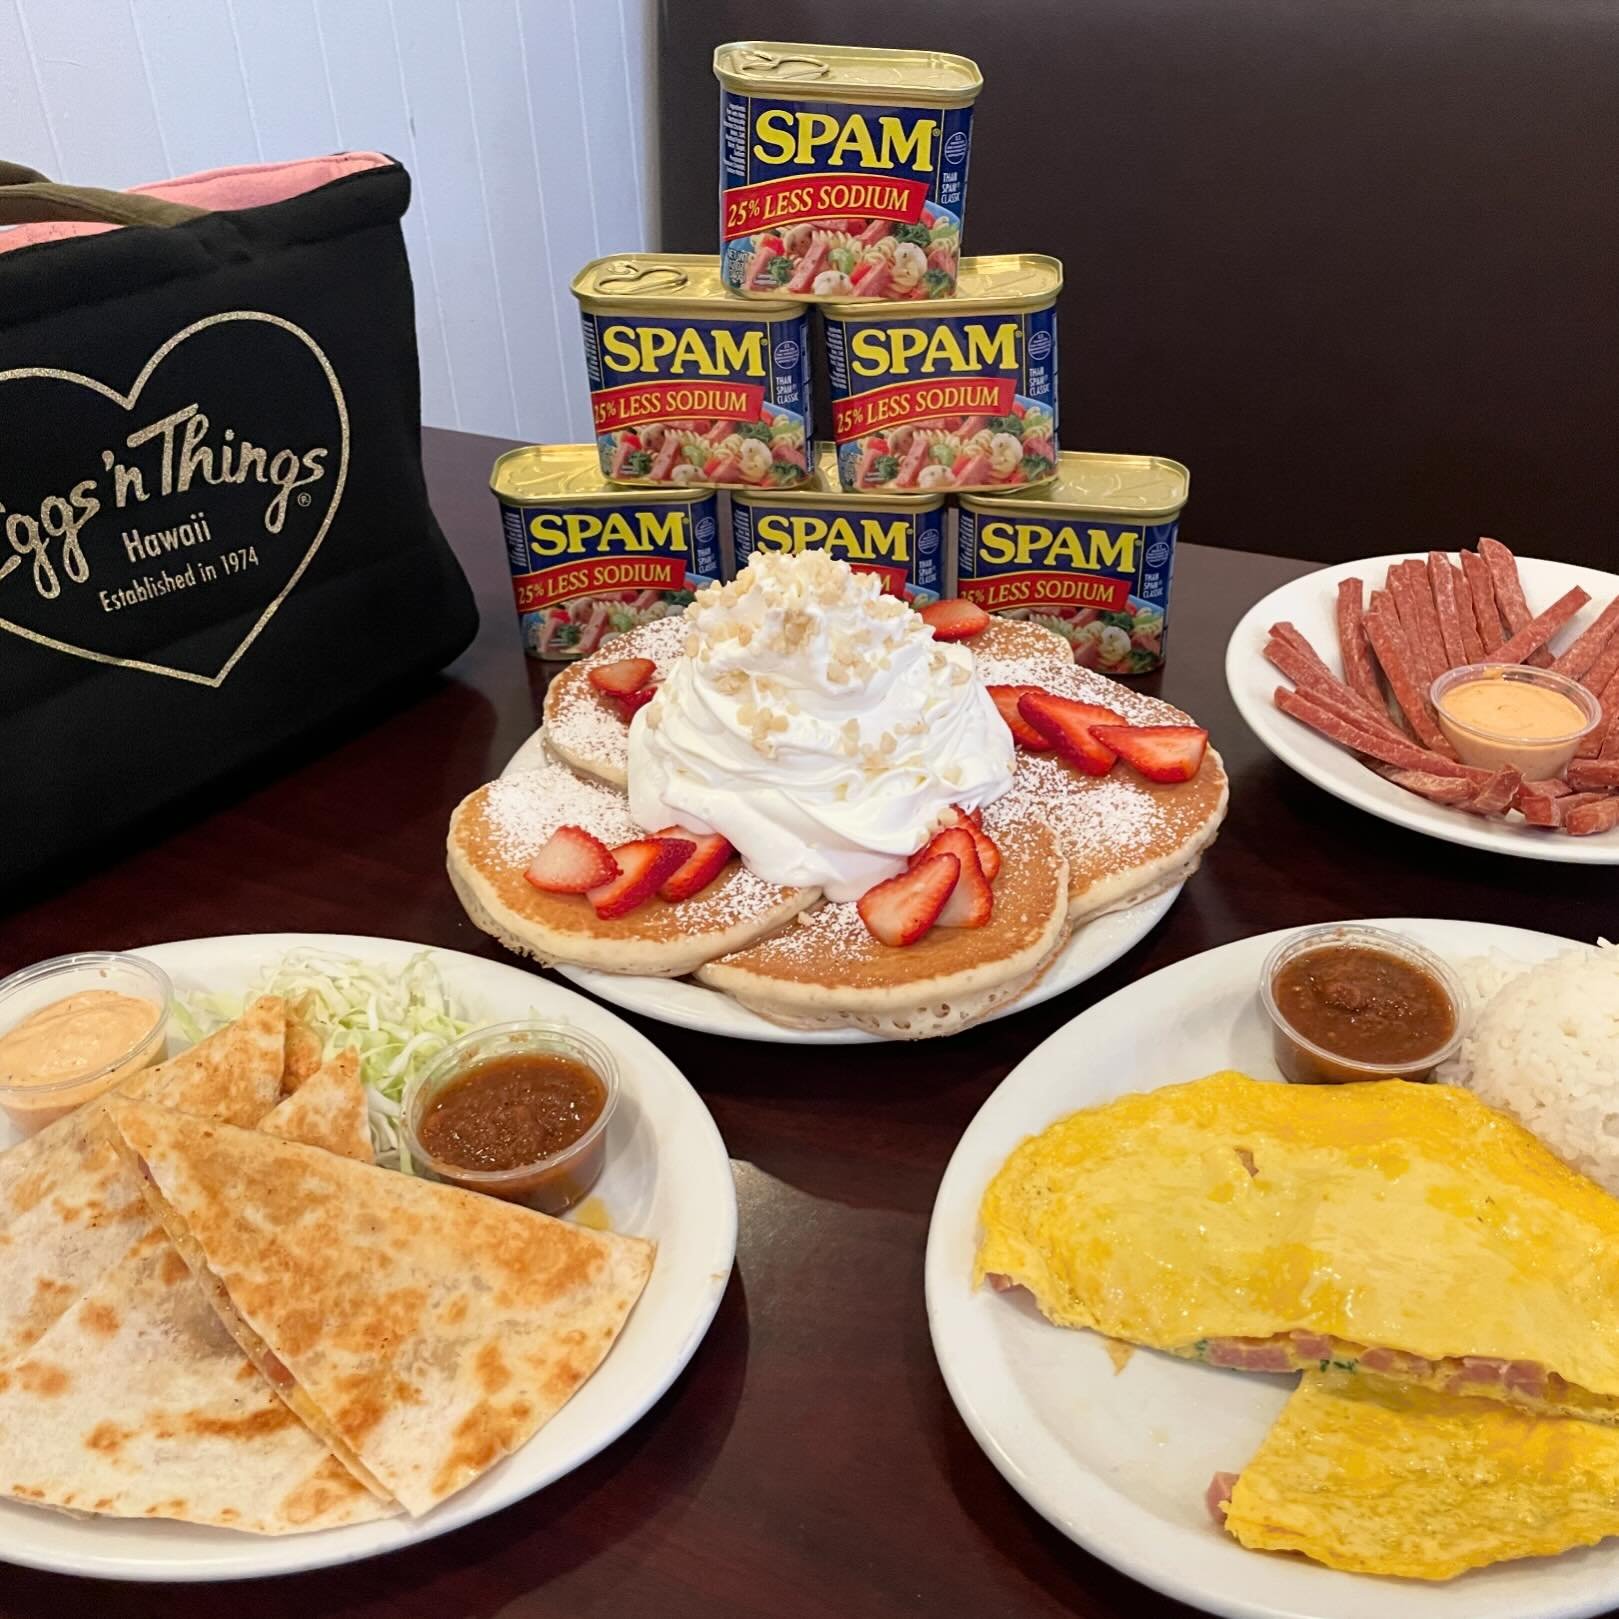 Have you been checking out our Dine In Restaurants such as Eggs N Things? Many have exclusive menu items only available until May 5. At Eggs N Things, they are serving a SPAM quesadilla that is only for the Waikiki SPAM JAM!